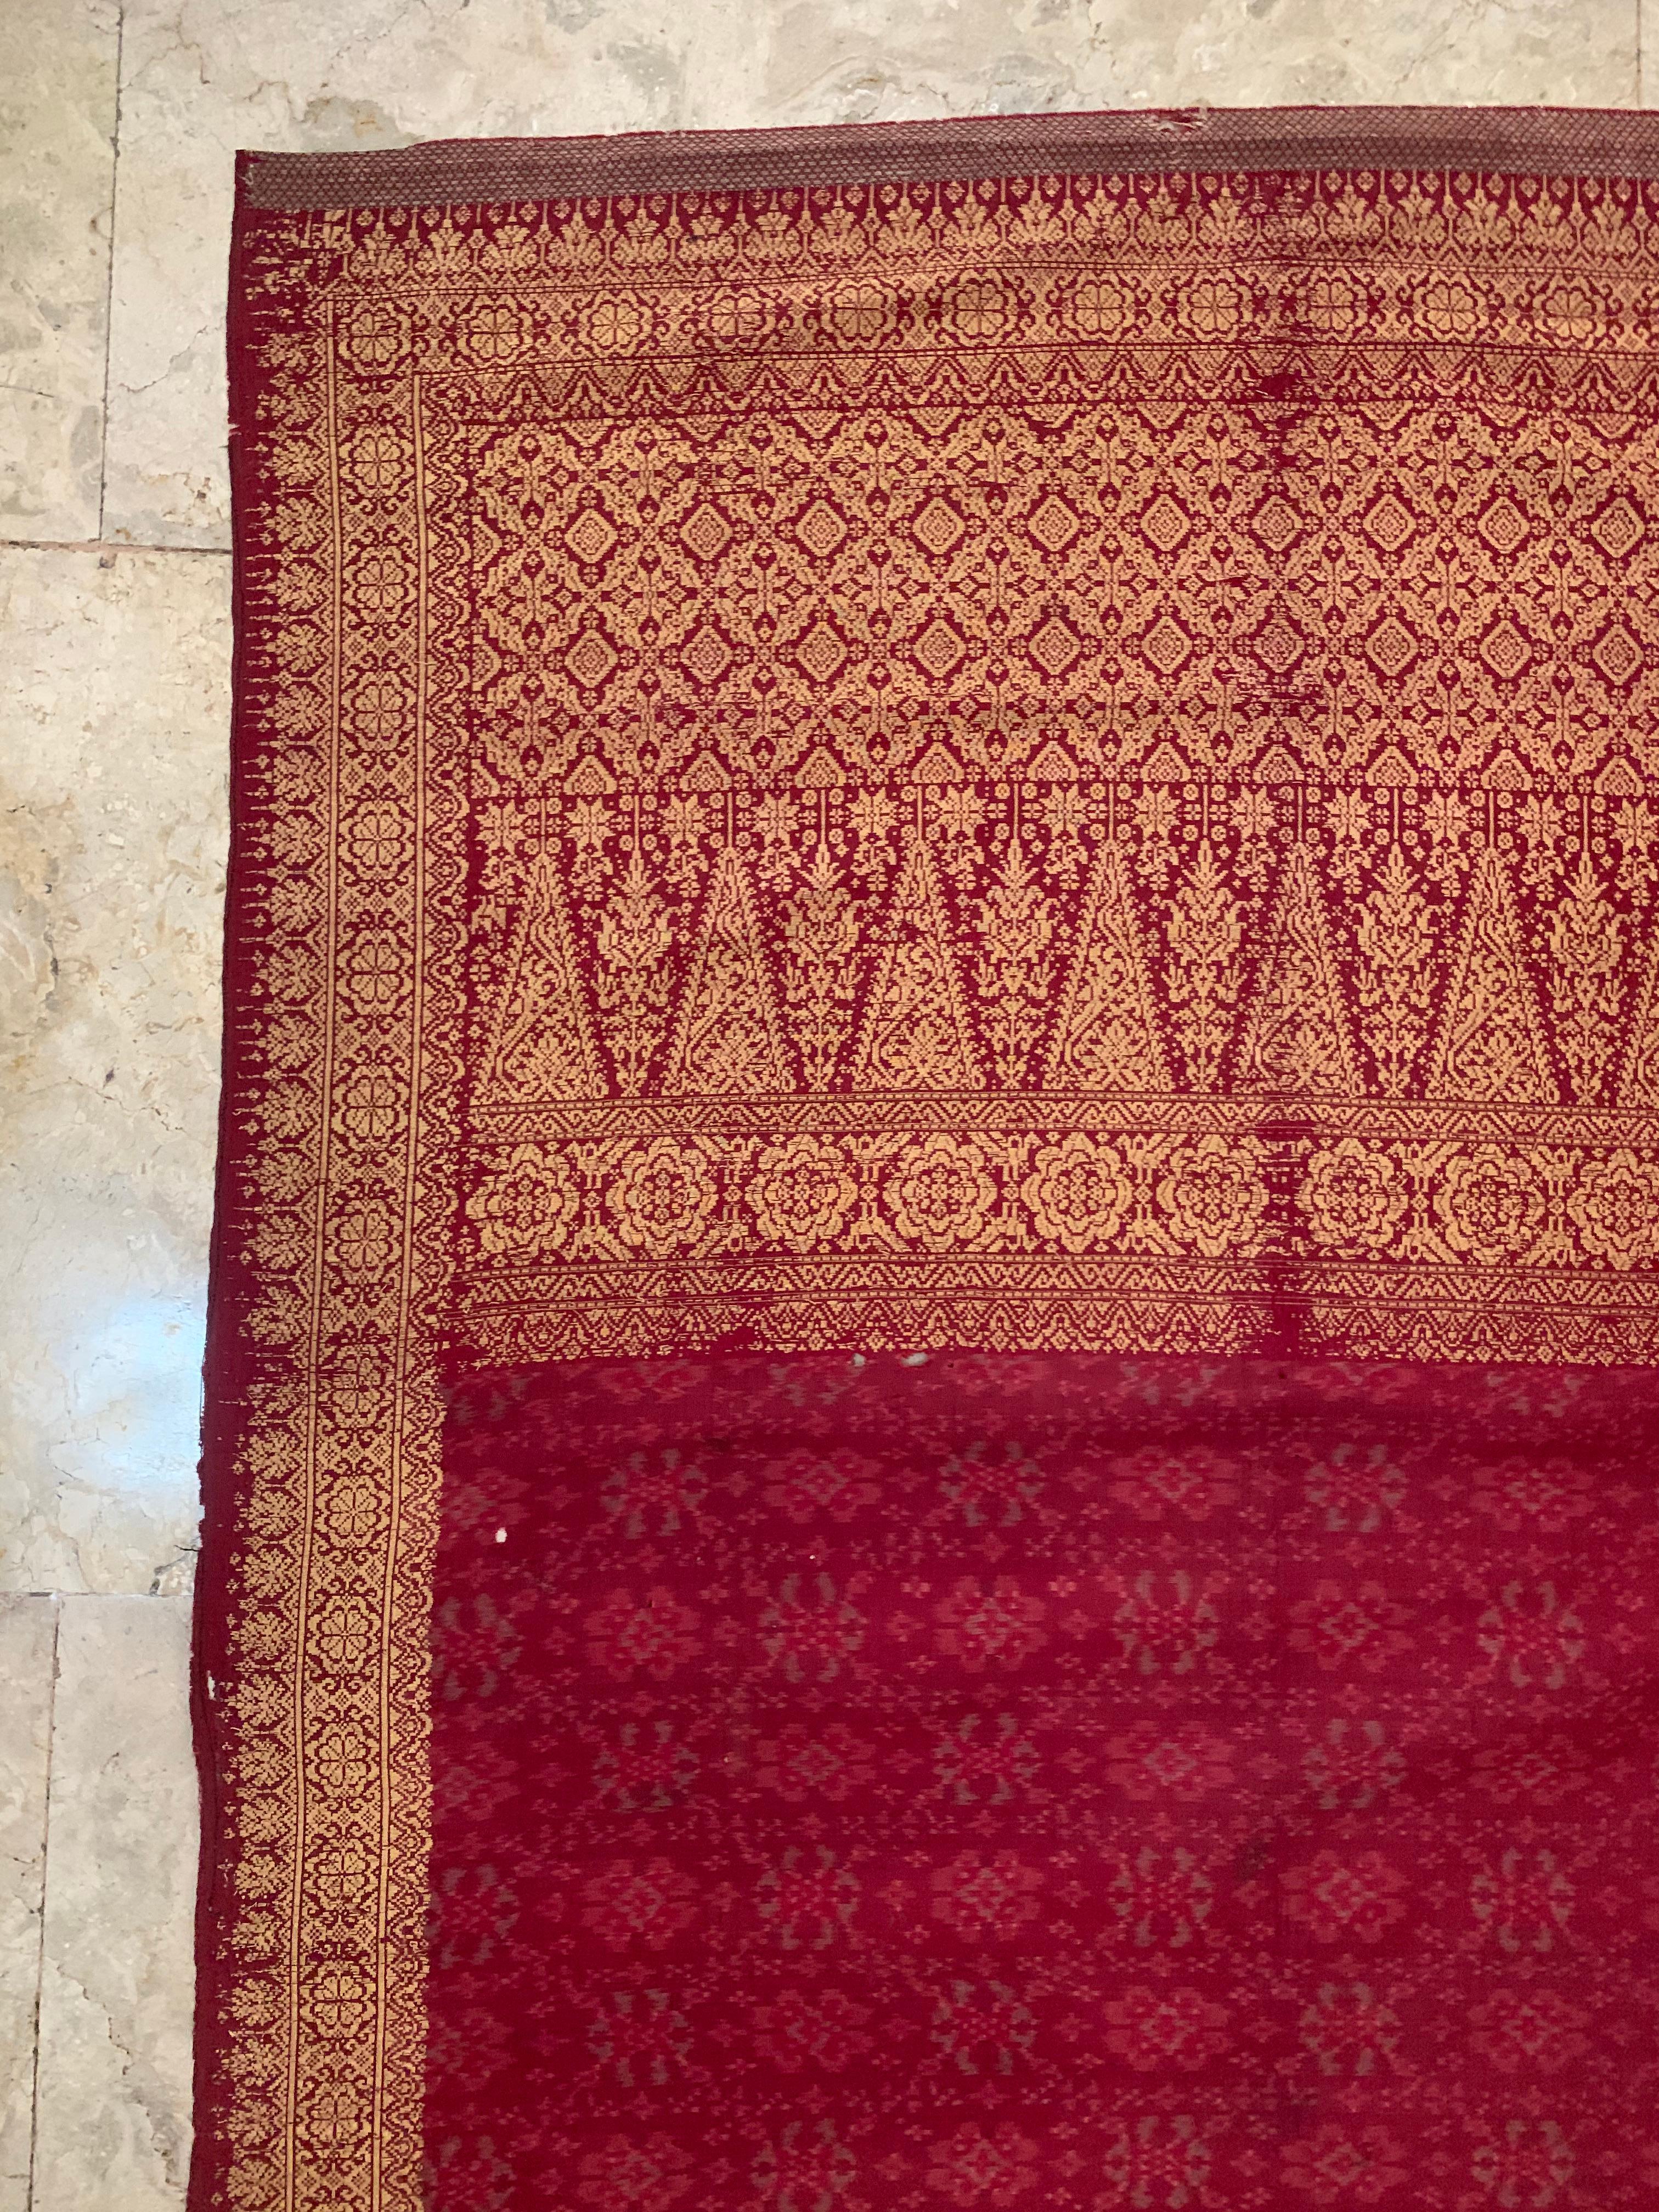 Yarn Ceremonial Silk Ikat from Sumatra with Stunning Motifs and Gold Leaf Detail